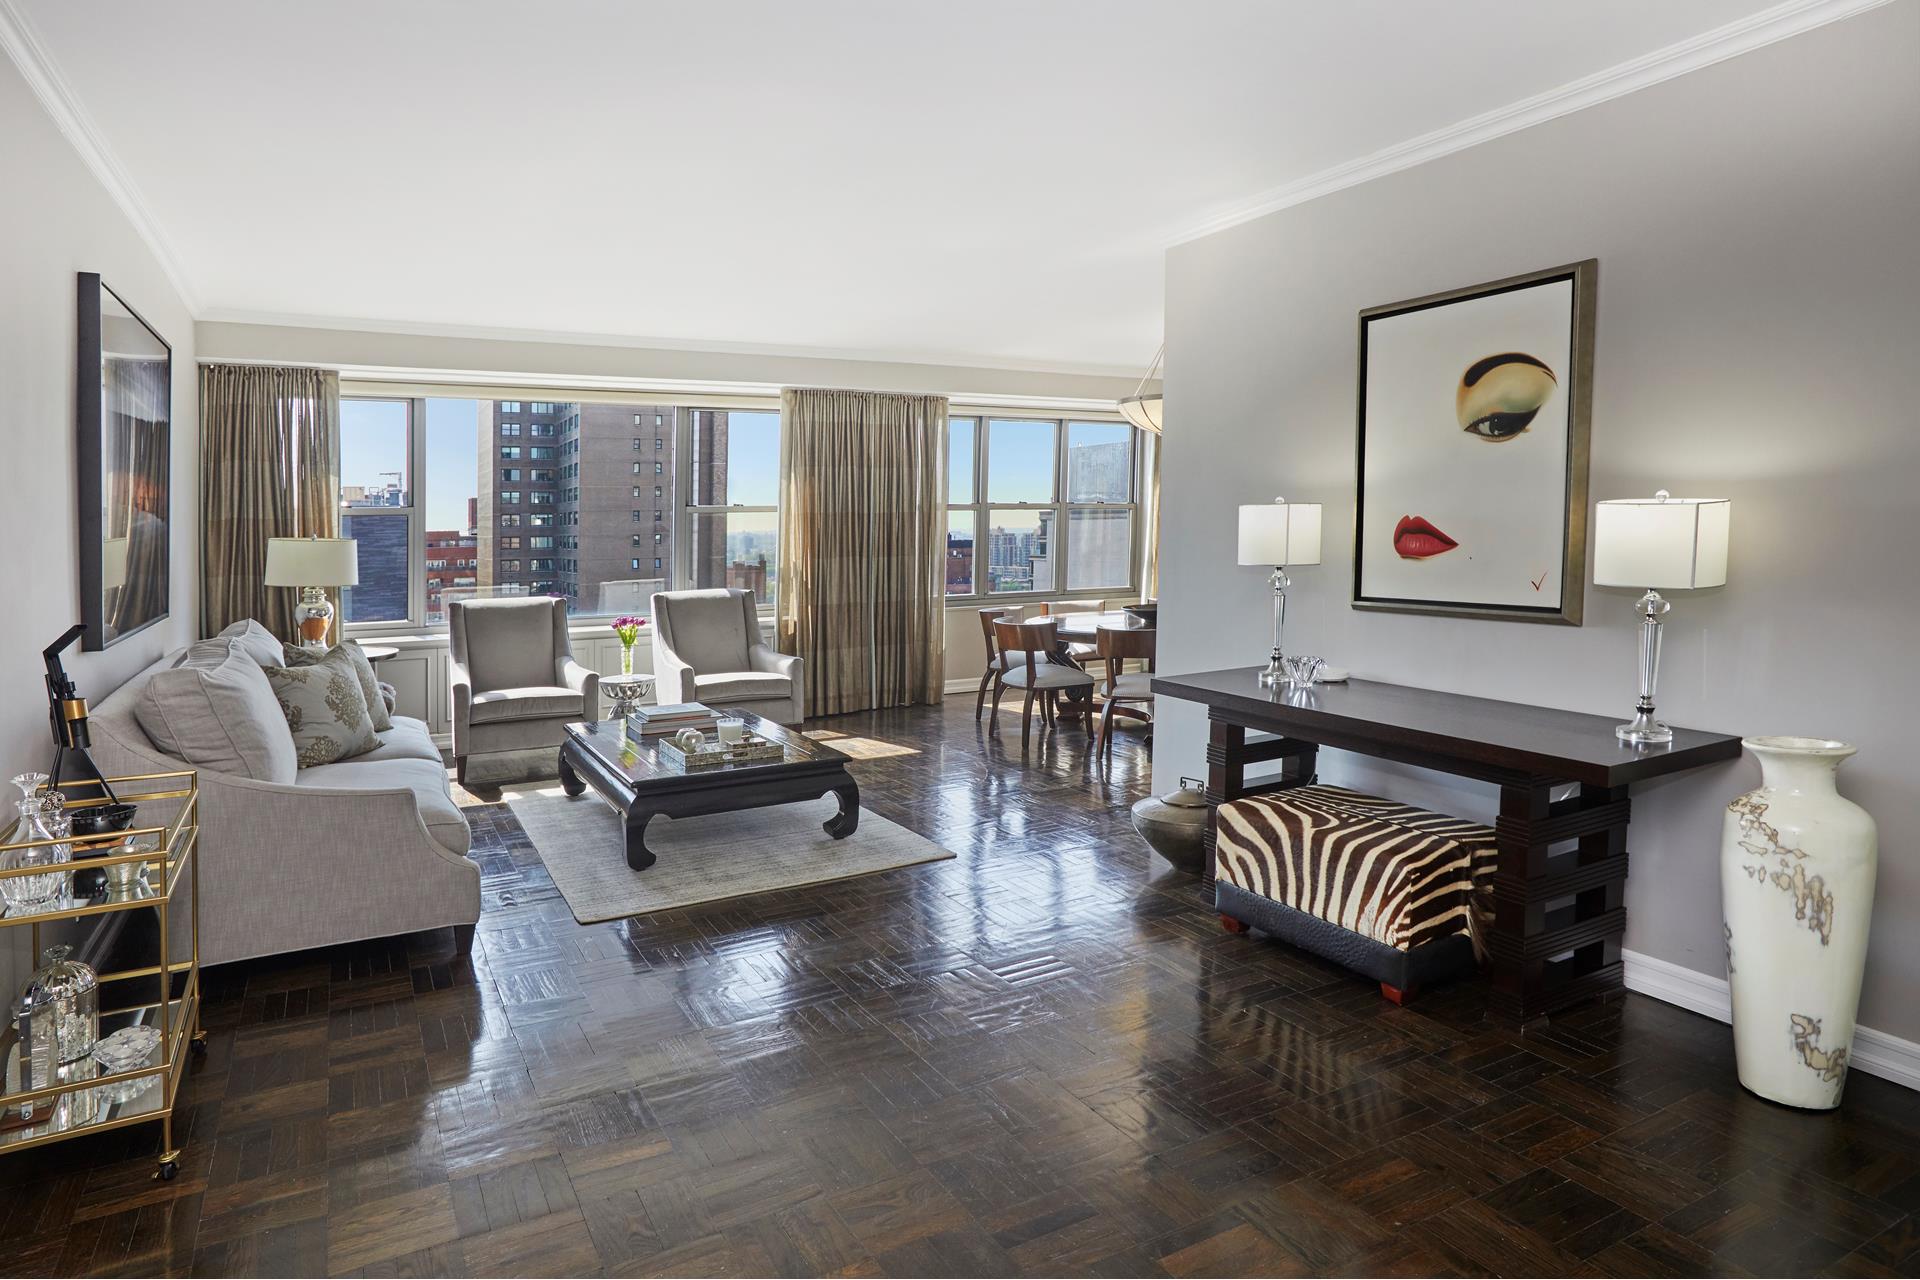 500 East 83rd Street Phm, Yorkville, Upper East Side, NYC - 3 Bedrooms  
3 Bathrooms  
8 Rooms - 